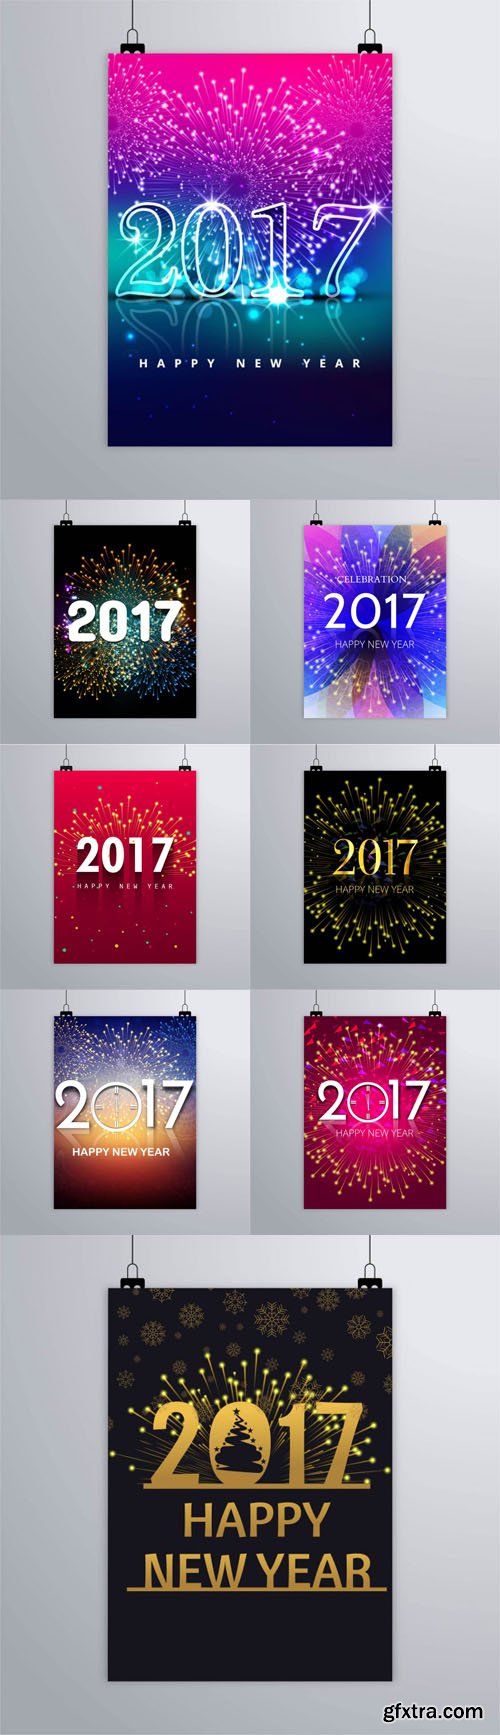 New Year 2017 Poster Vector [8 Templates]